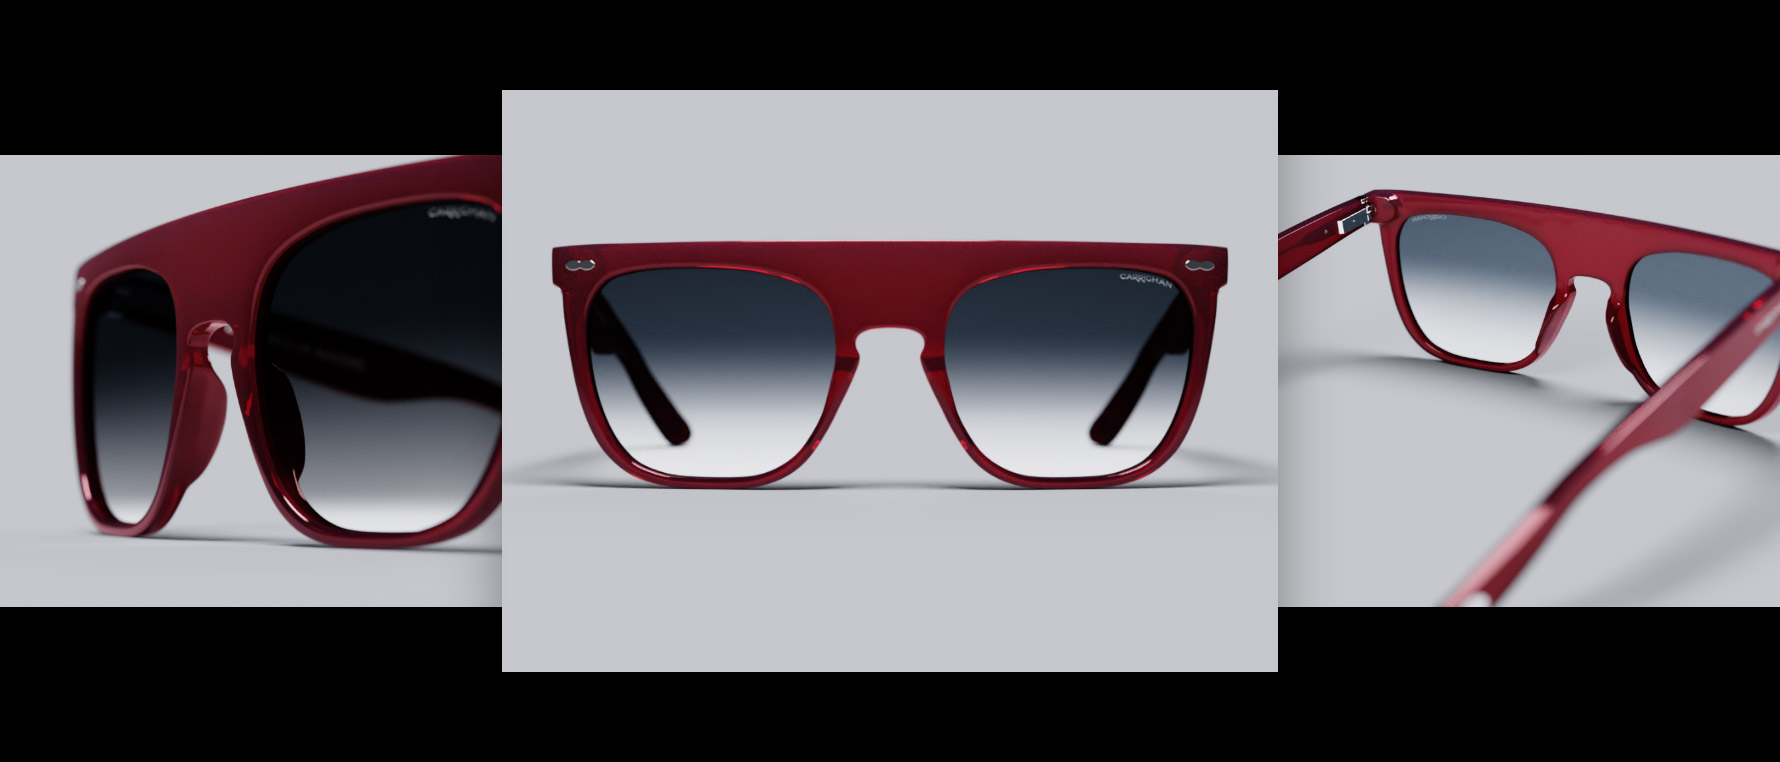 Group of high quality images of the same red sunglasses